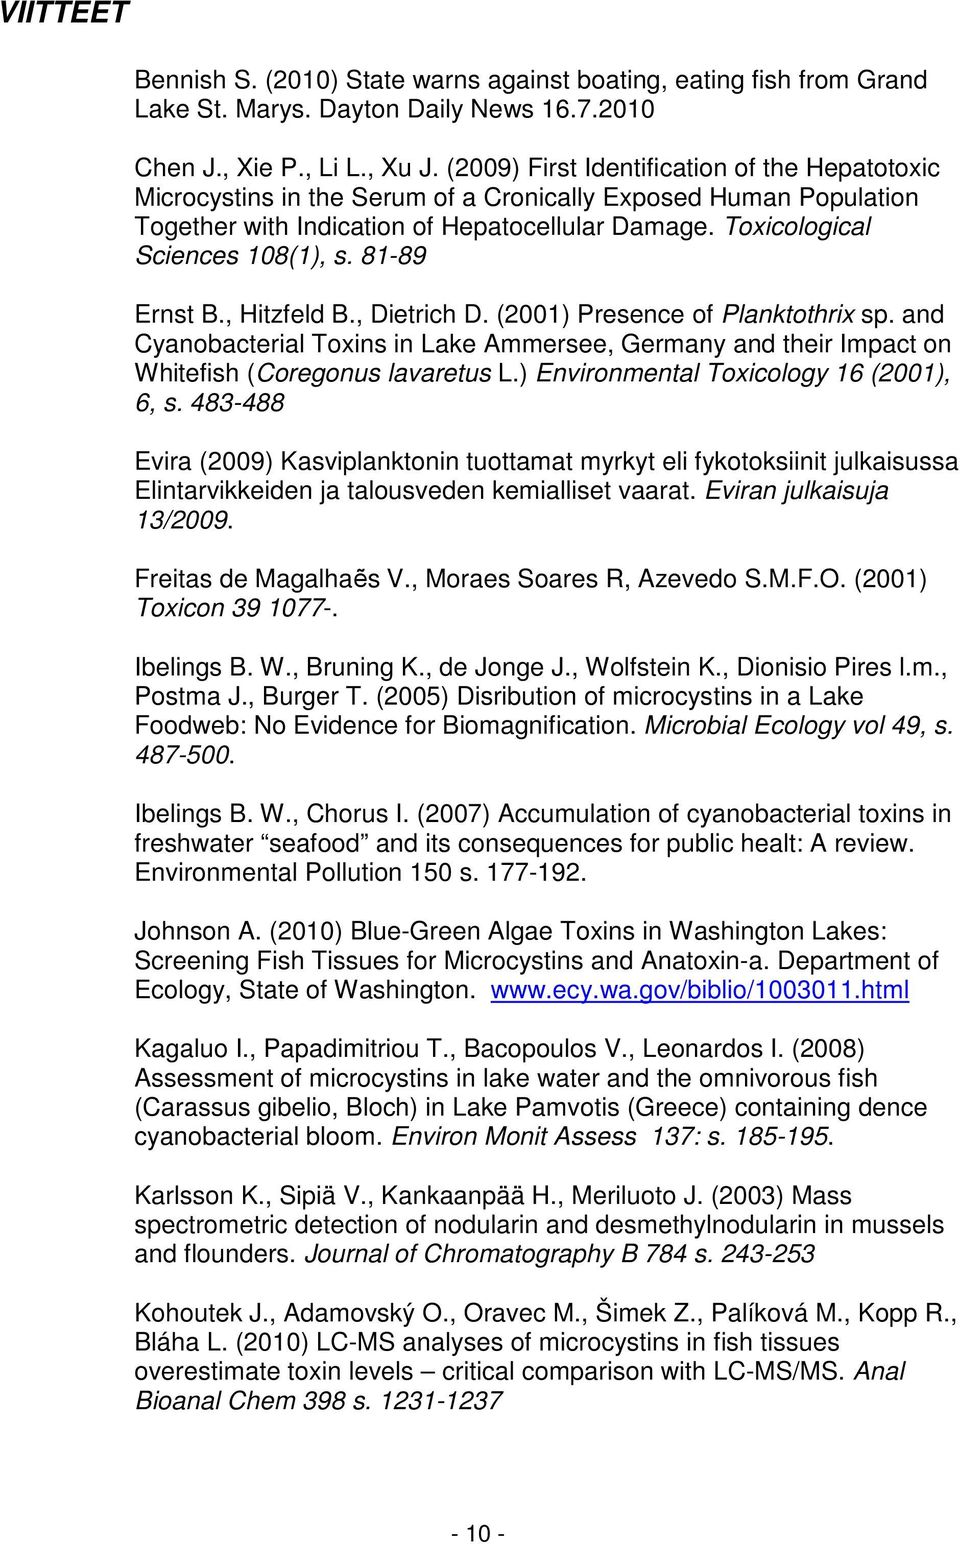 81-89 Ernst B., Hitzfeld B., Dietrich D. (2001) Presence of Planktothrix sp. and Cyanobacterial Toxins in Lake Ammersee, Germany and their Impact on Whitefish (Coregonus lavaretus L.